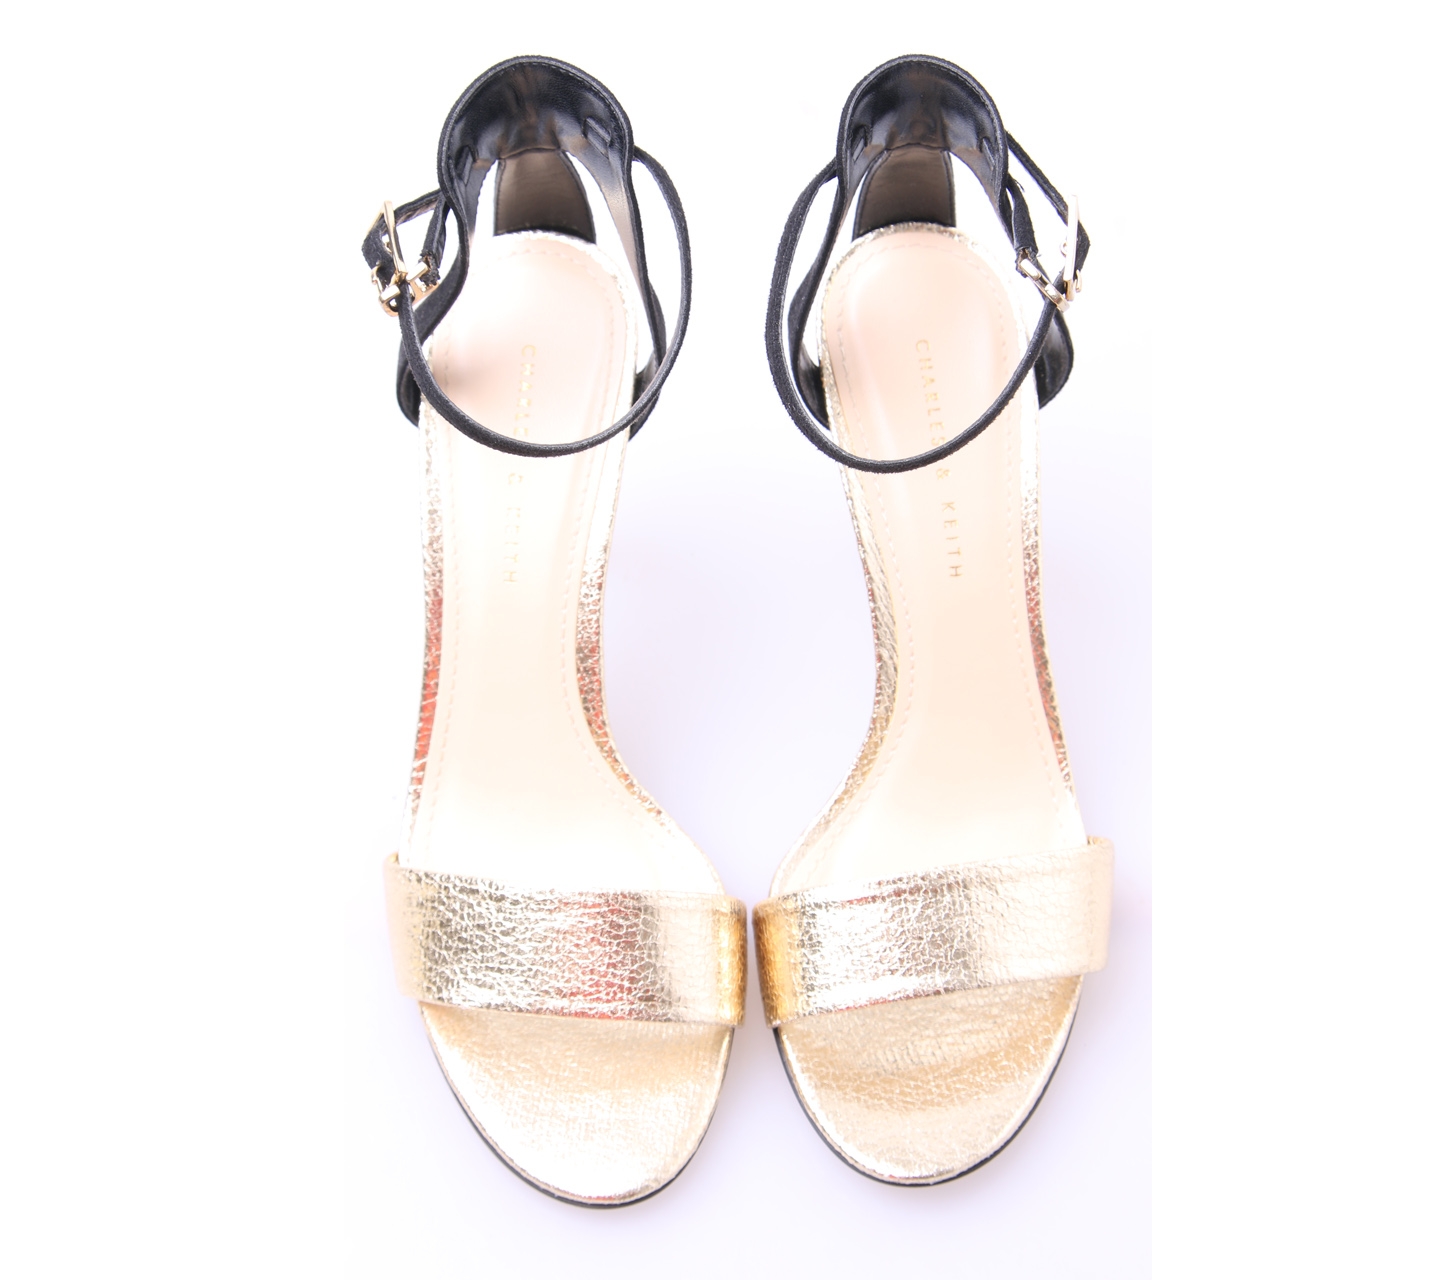 Charles & keith gold open toe heels